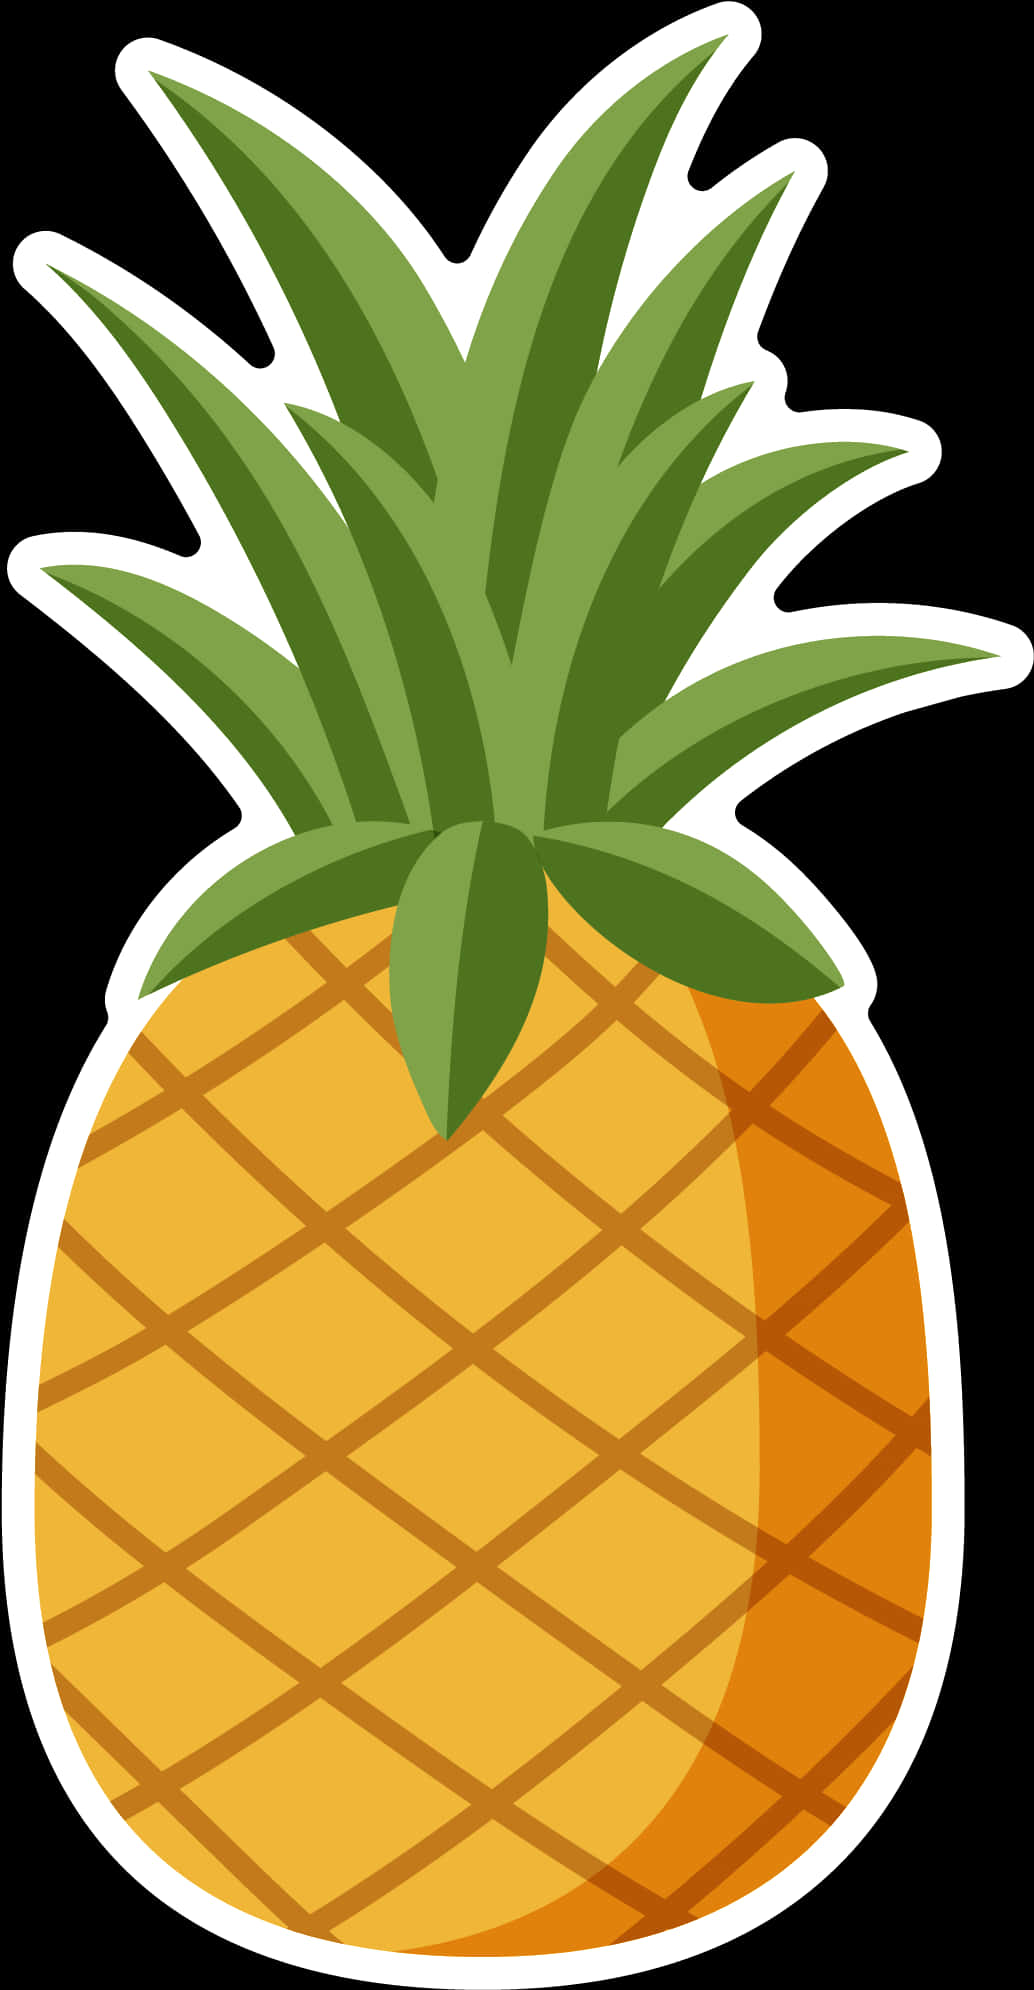 Cartoon Pineapple Graphic PNG